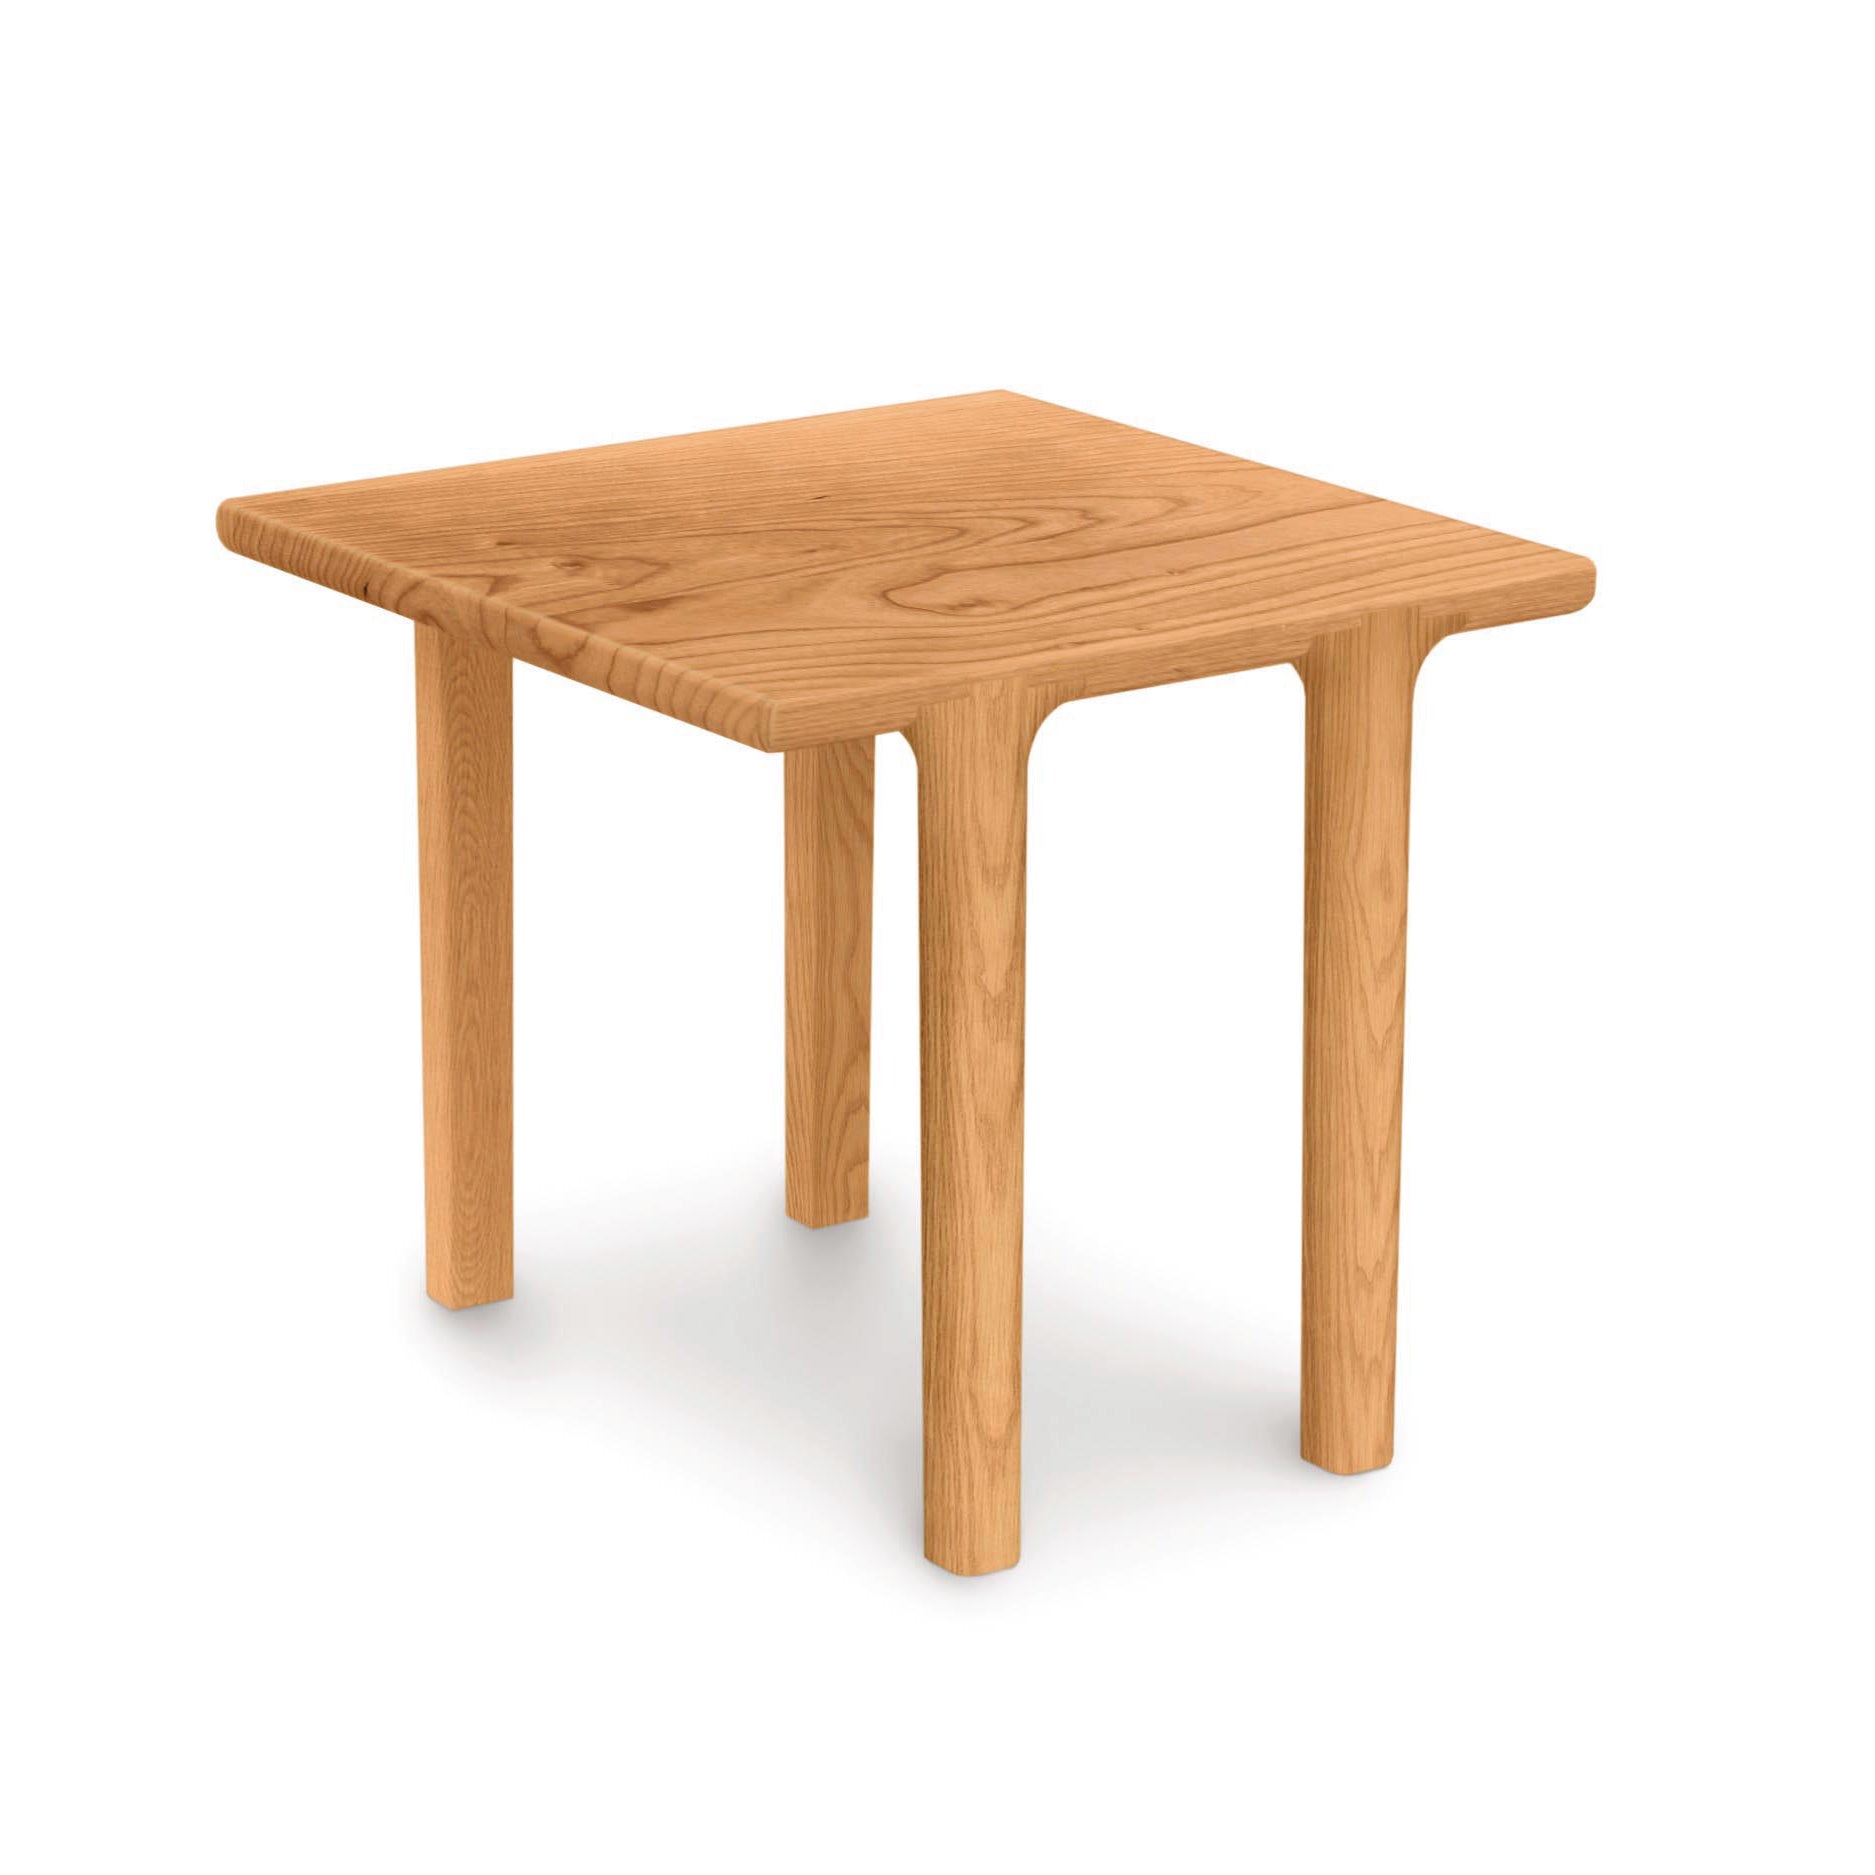 A Sierra Square End Table by Copeland Furniture on a white background.